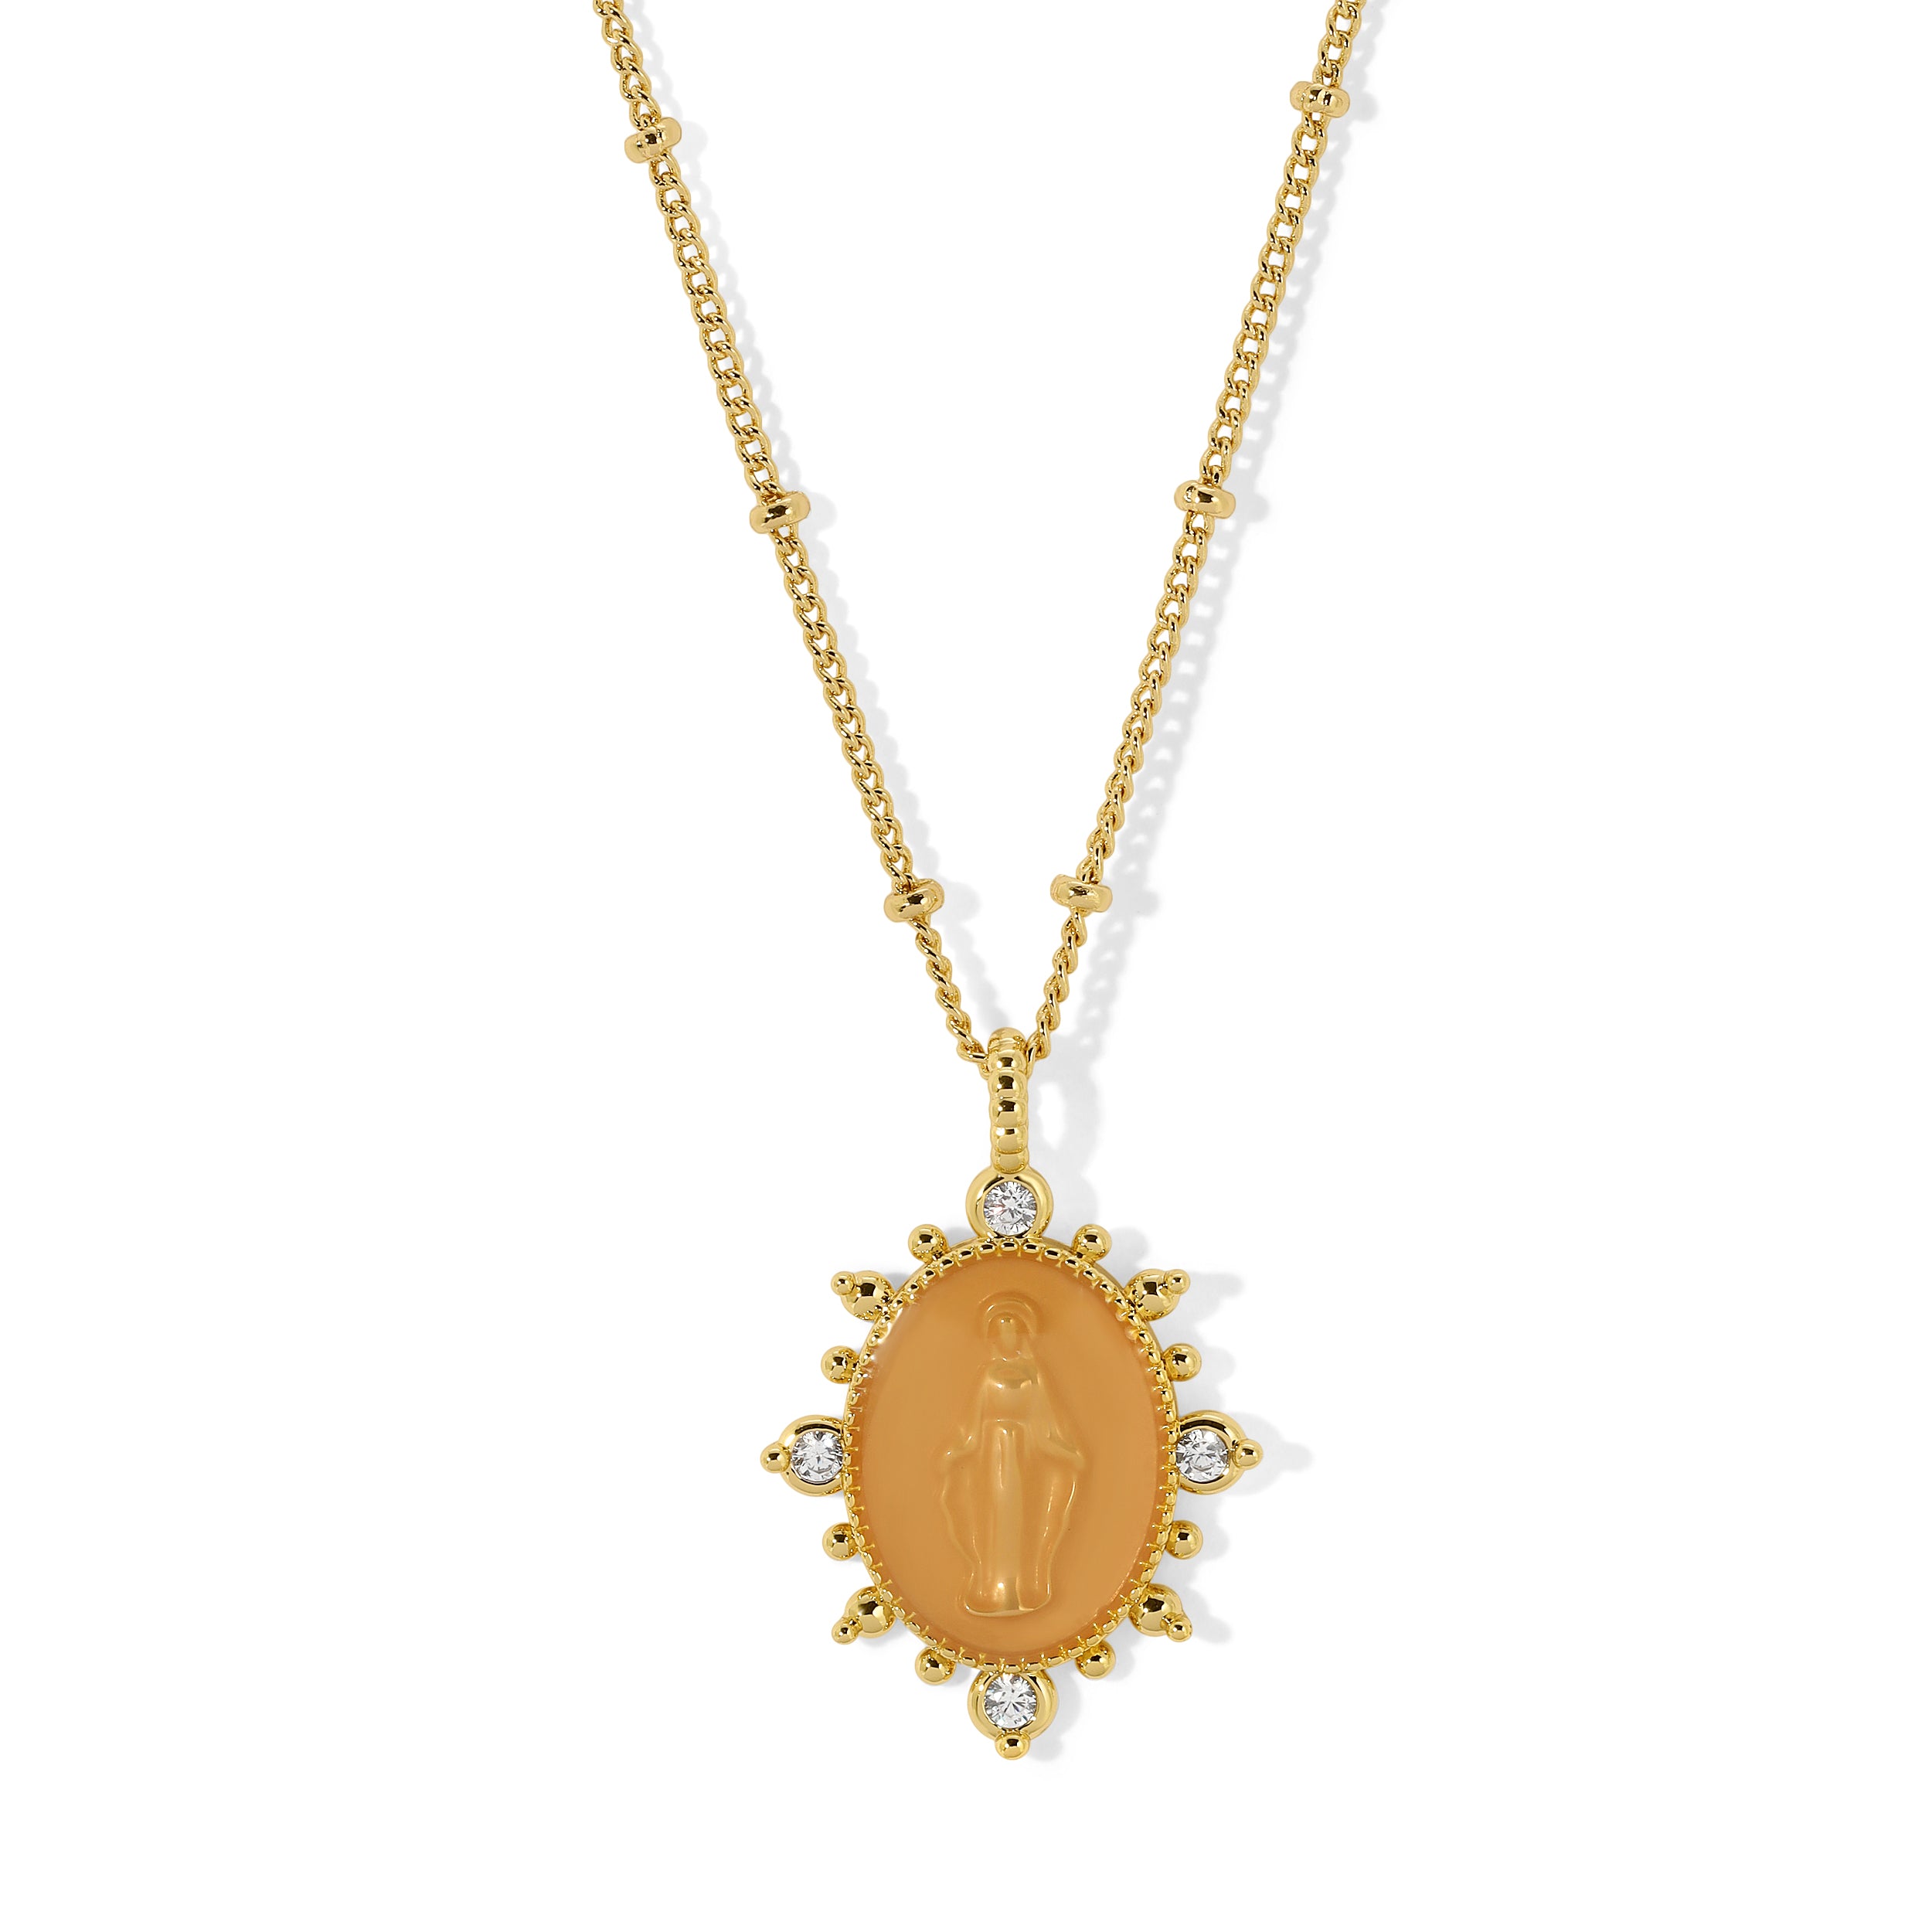 Lady Lourdes Necklace in Nude